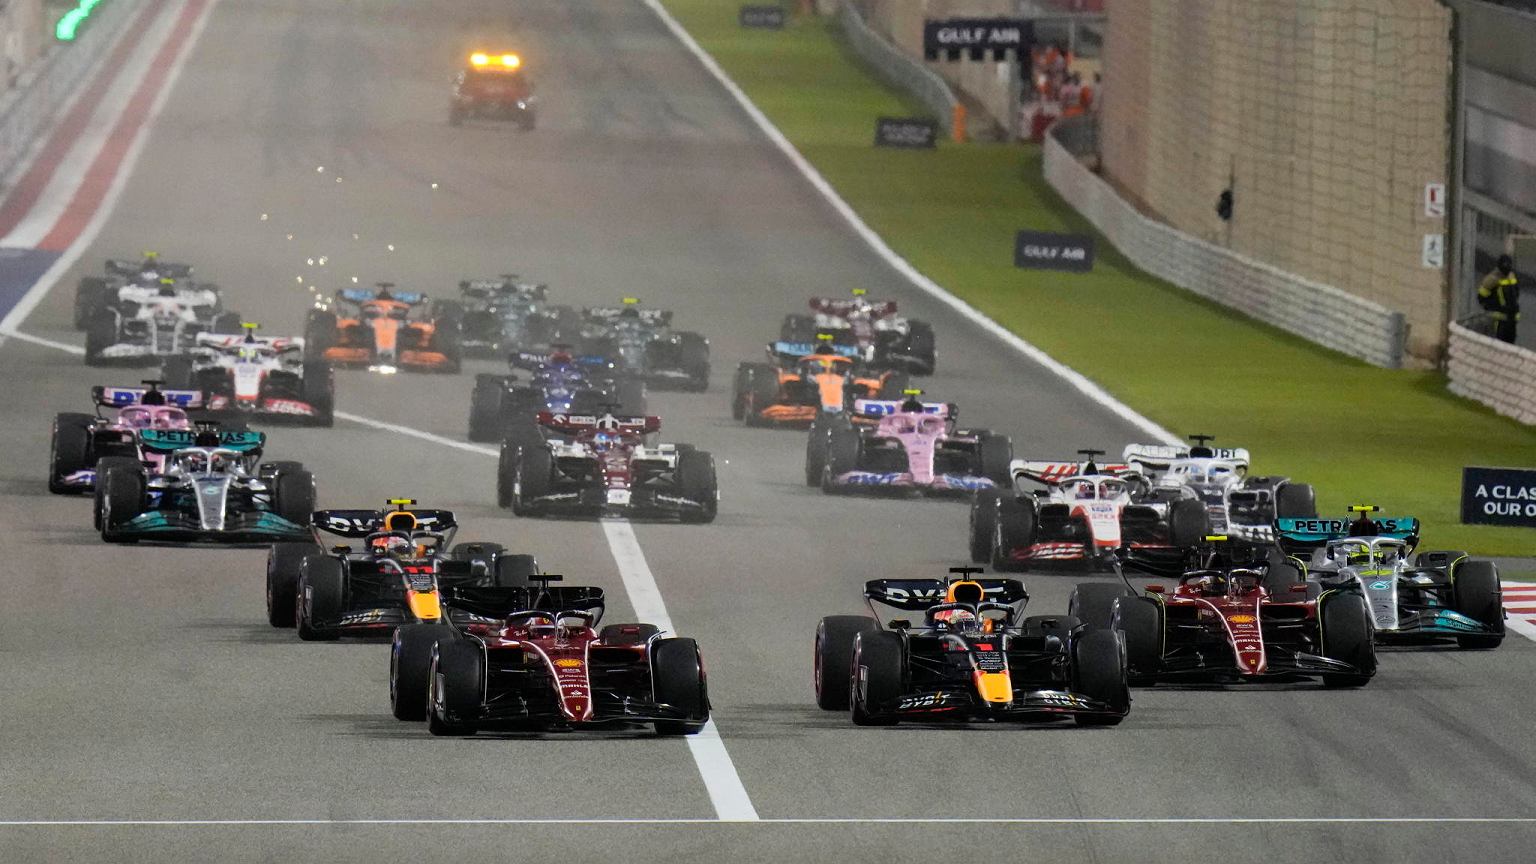 The well-known cause of Red Bull's nightmare at the Bahrain Grand Prix. 